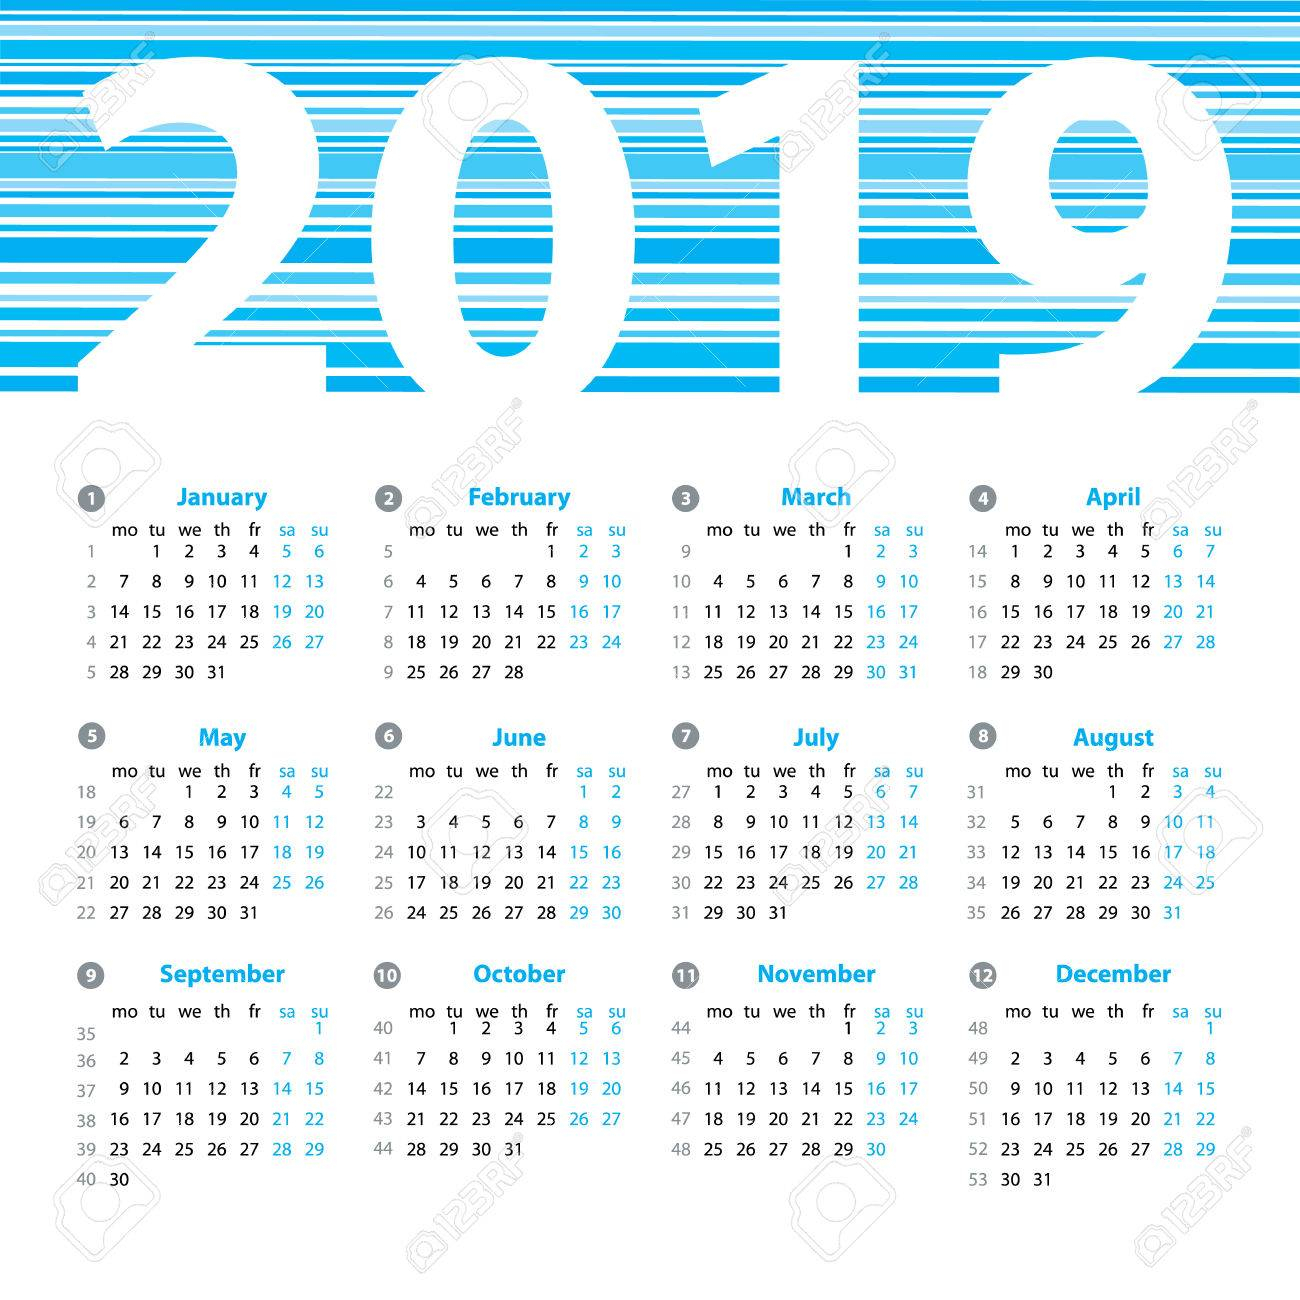 Calendar 2019 Year Vector Design Template With Week Numbers And..